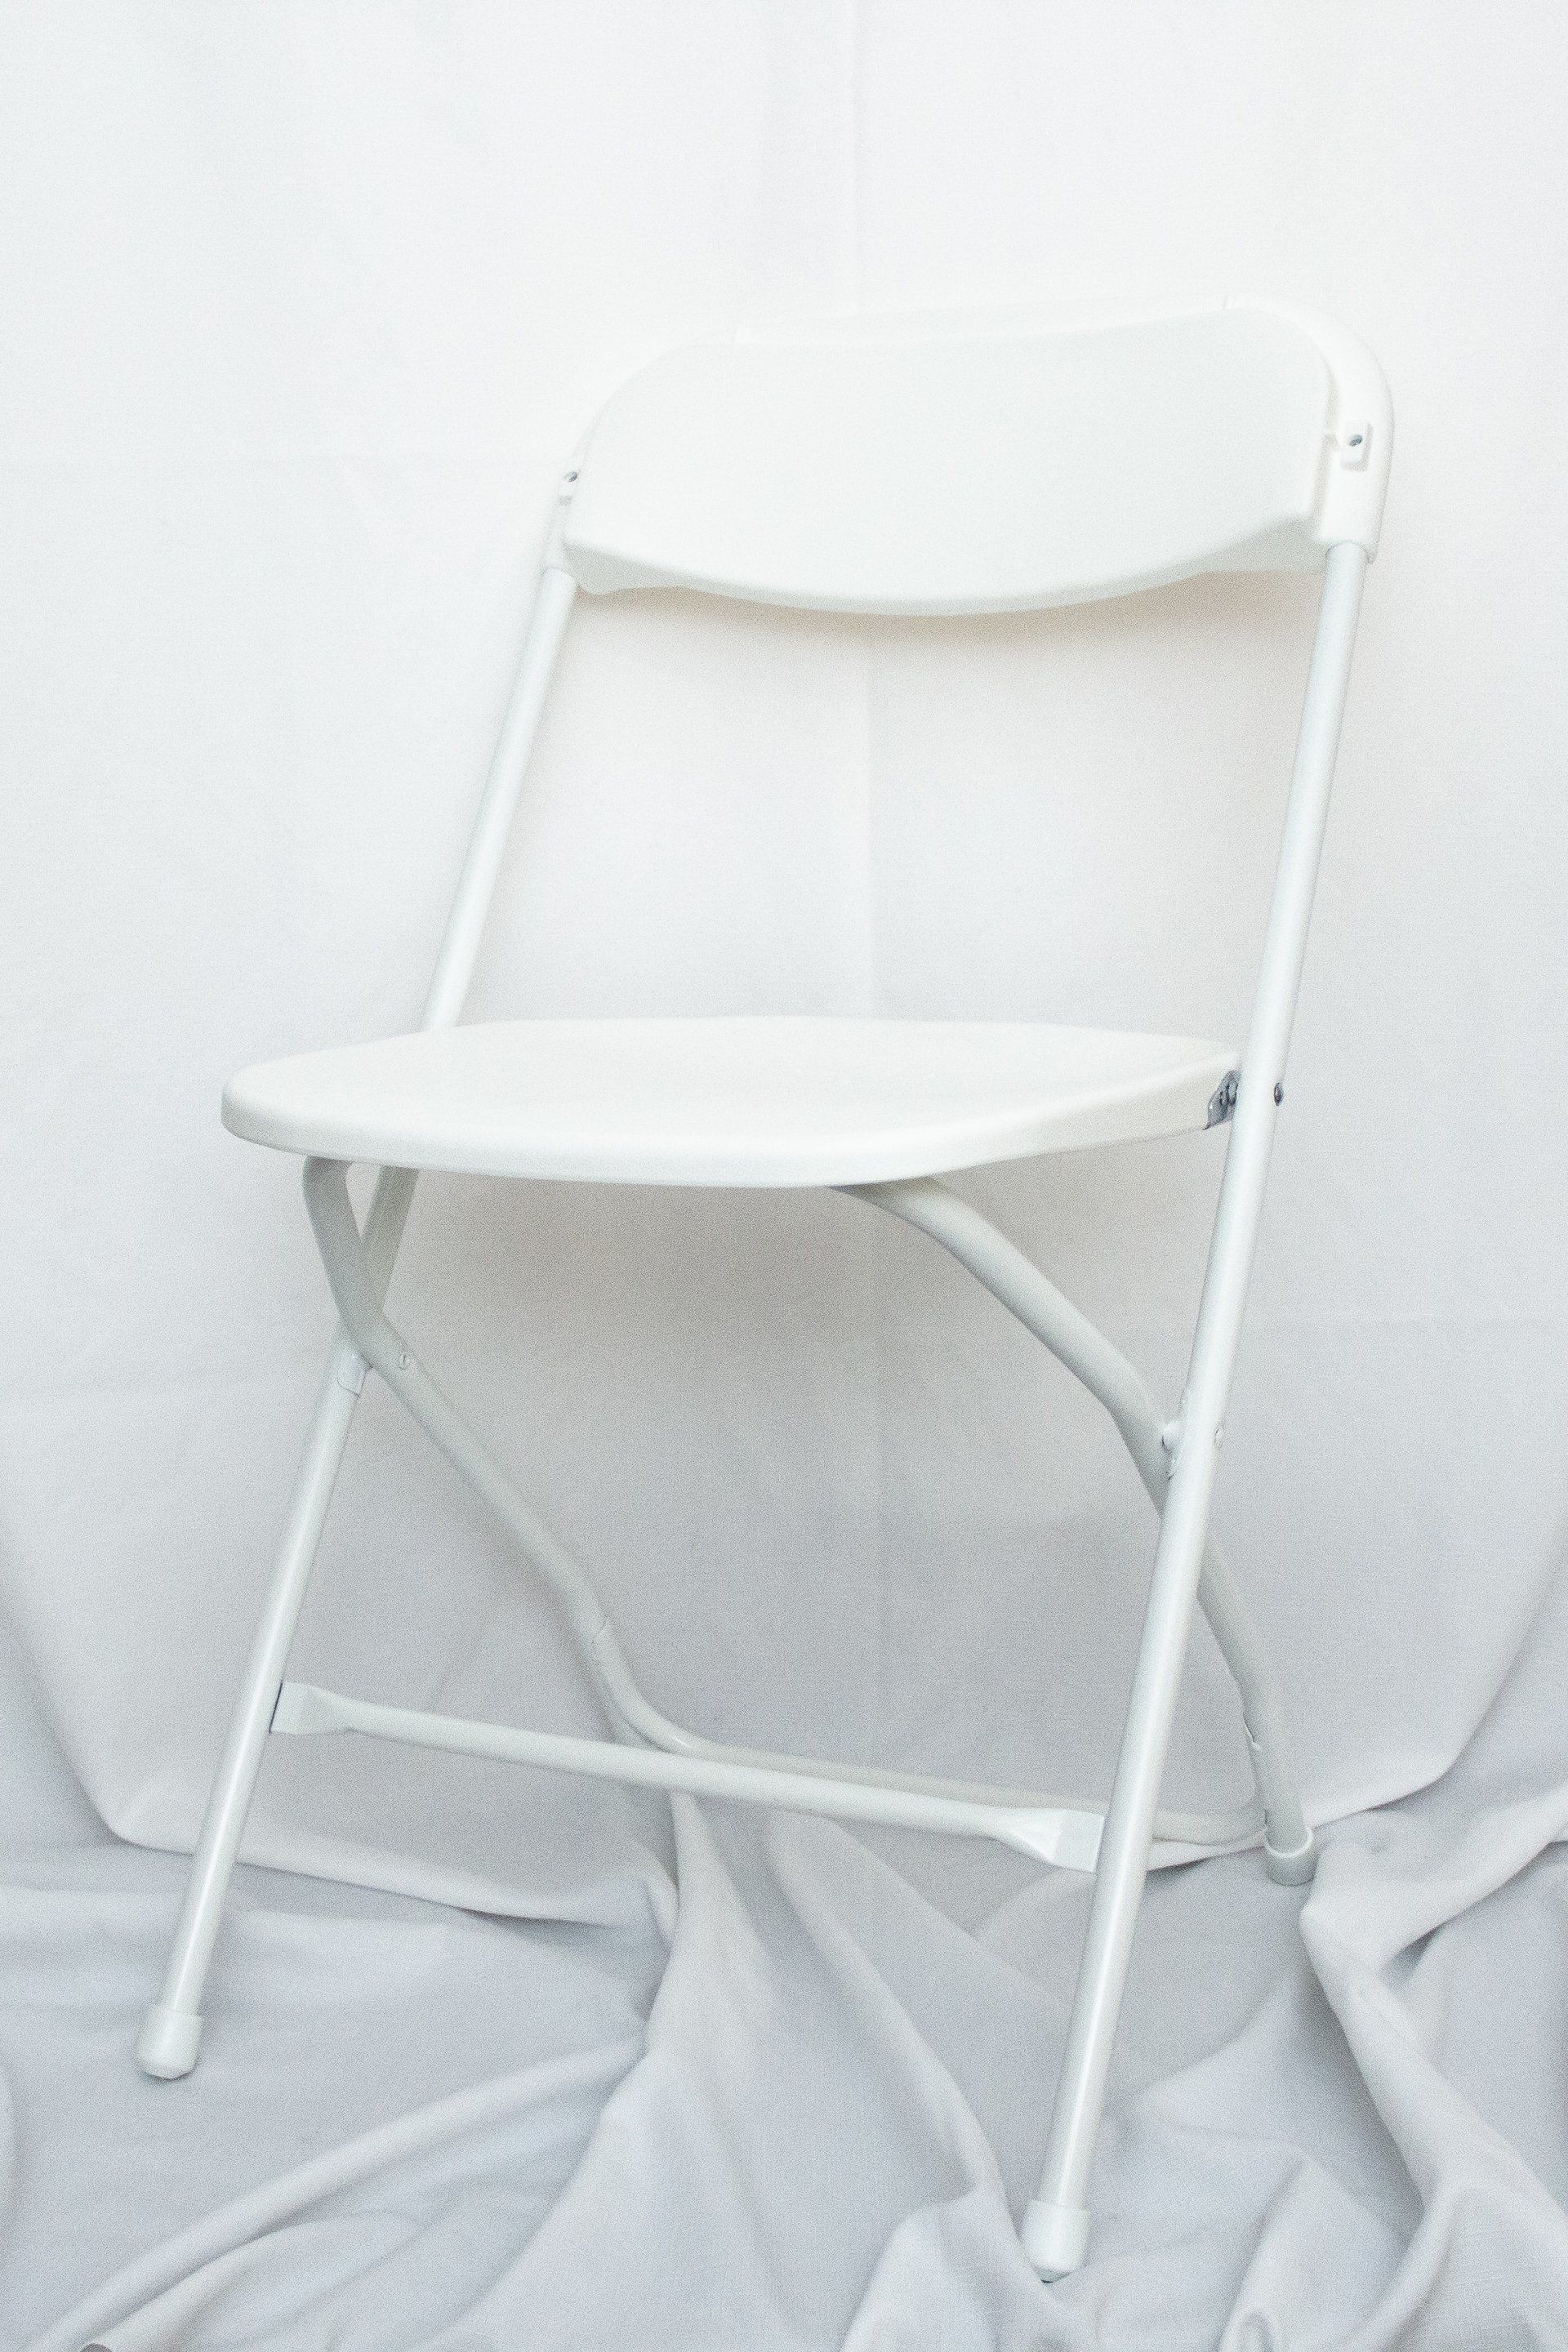 A white folding chair is sitting on a white cloth.